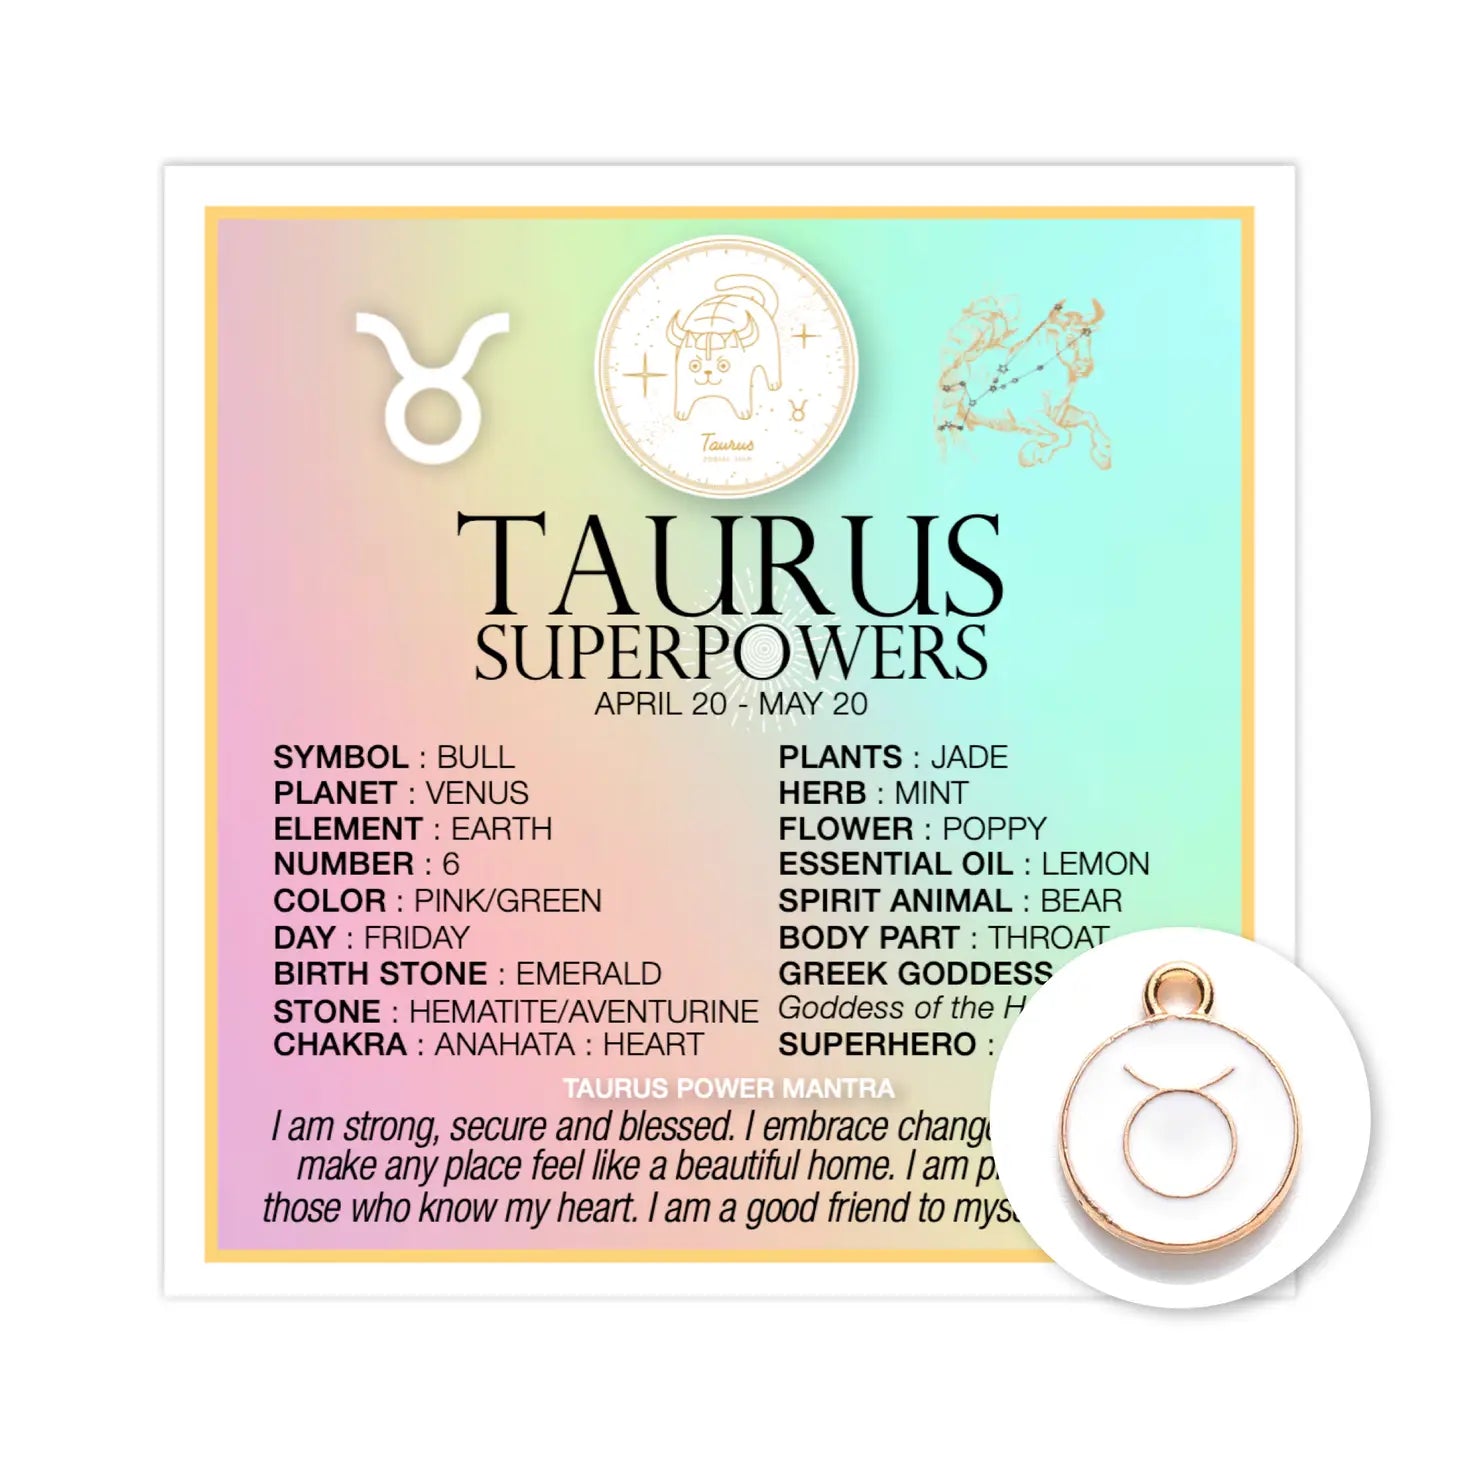 Taurus Superpowers - The Hare and the Moon